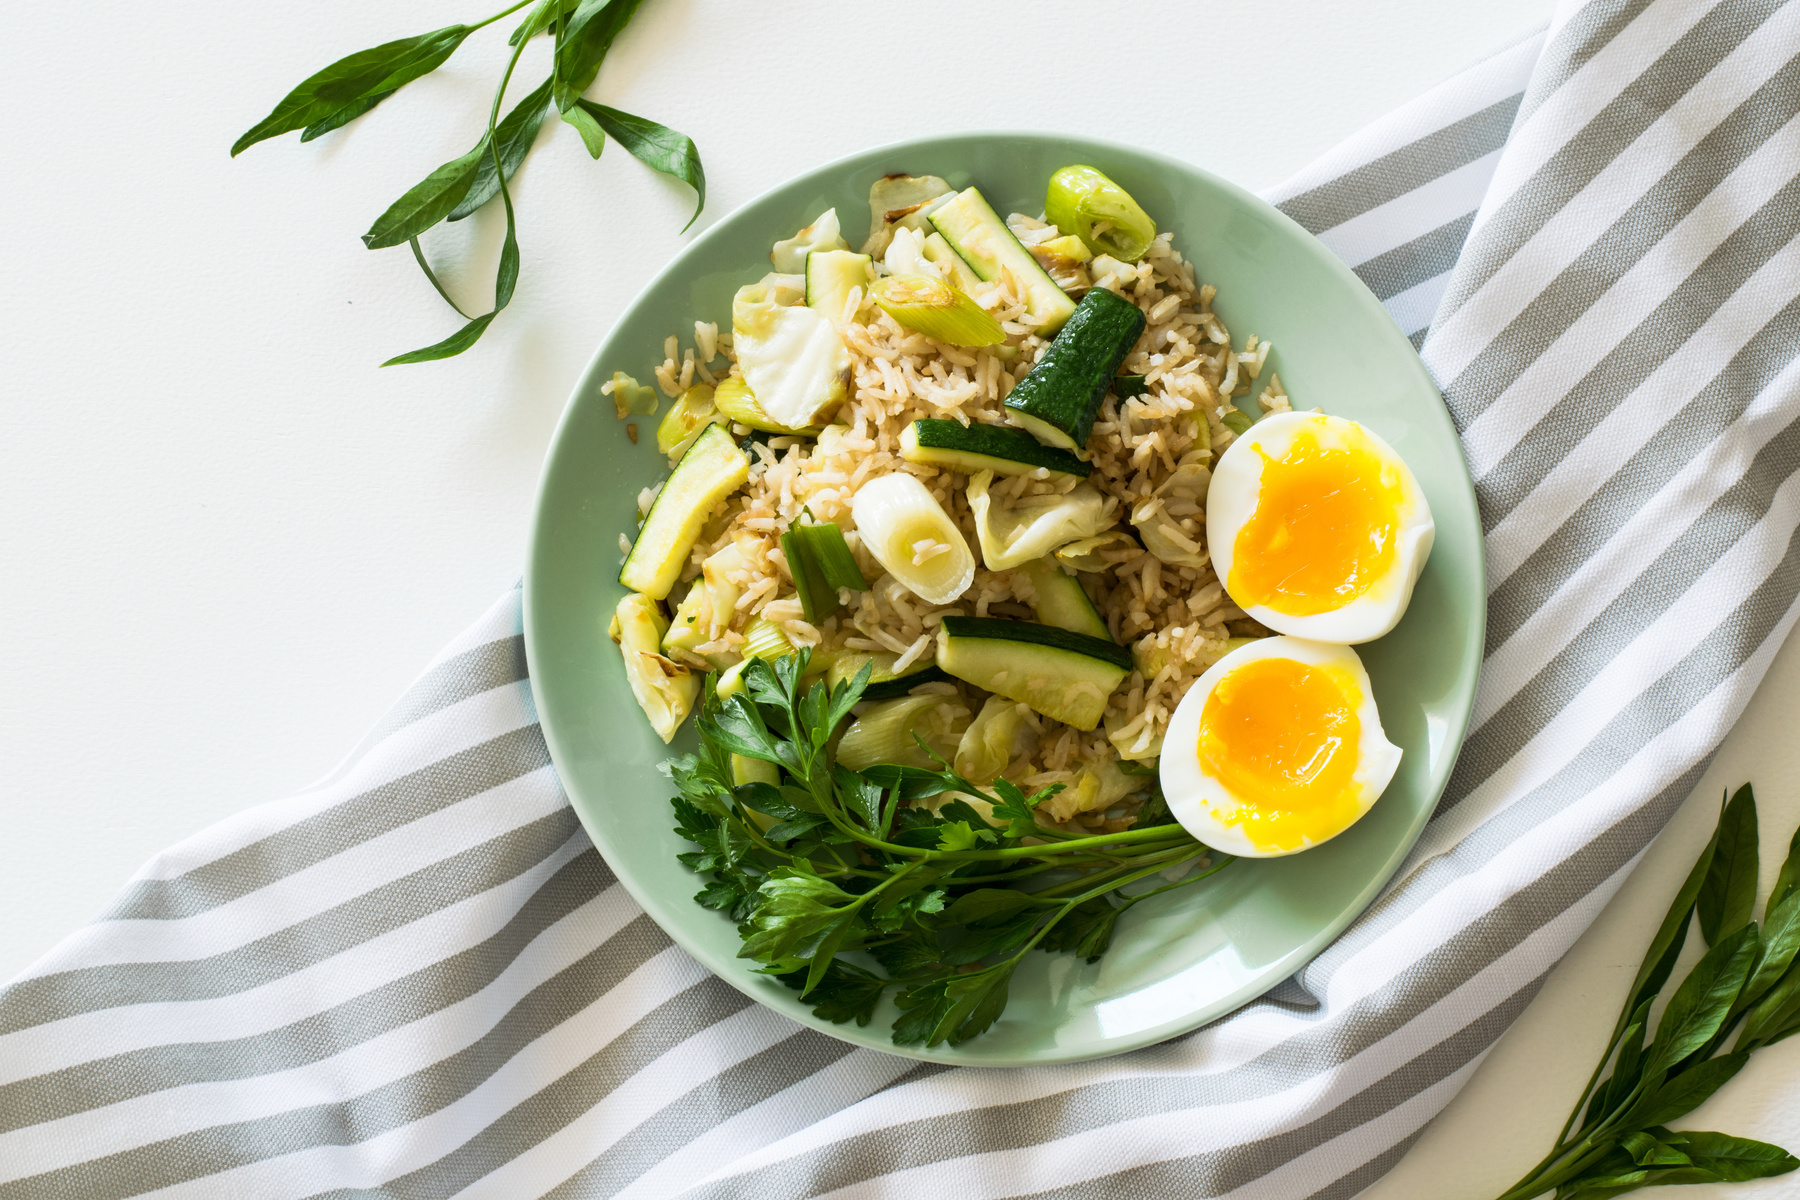 Fried Rice With Poached Egg, Zucchini, And Celery on Round Green Ceramic Plate